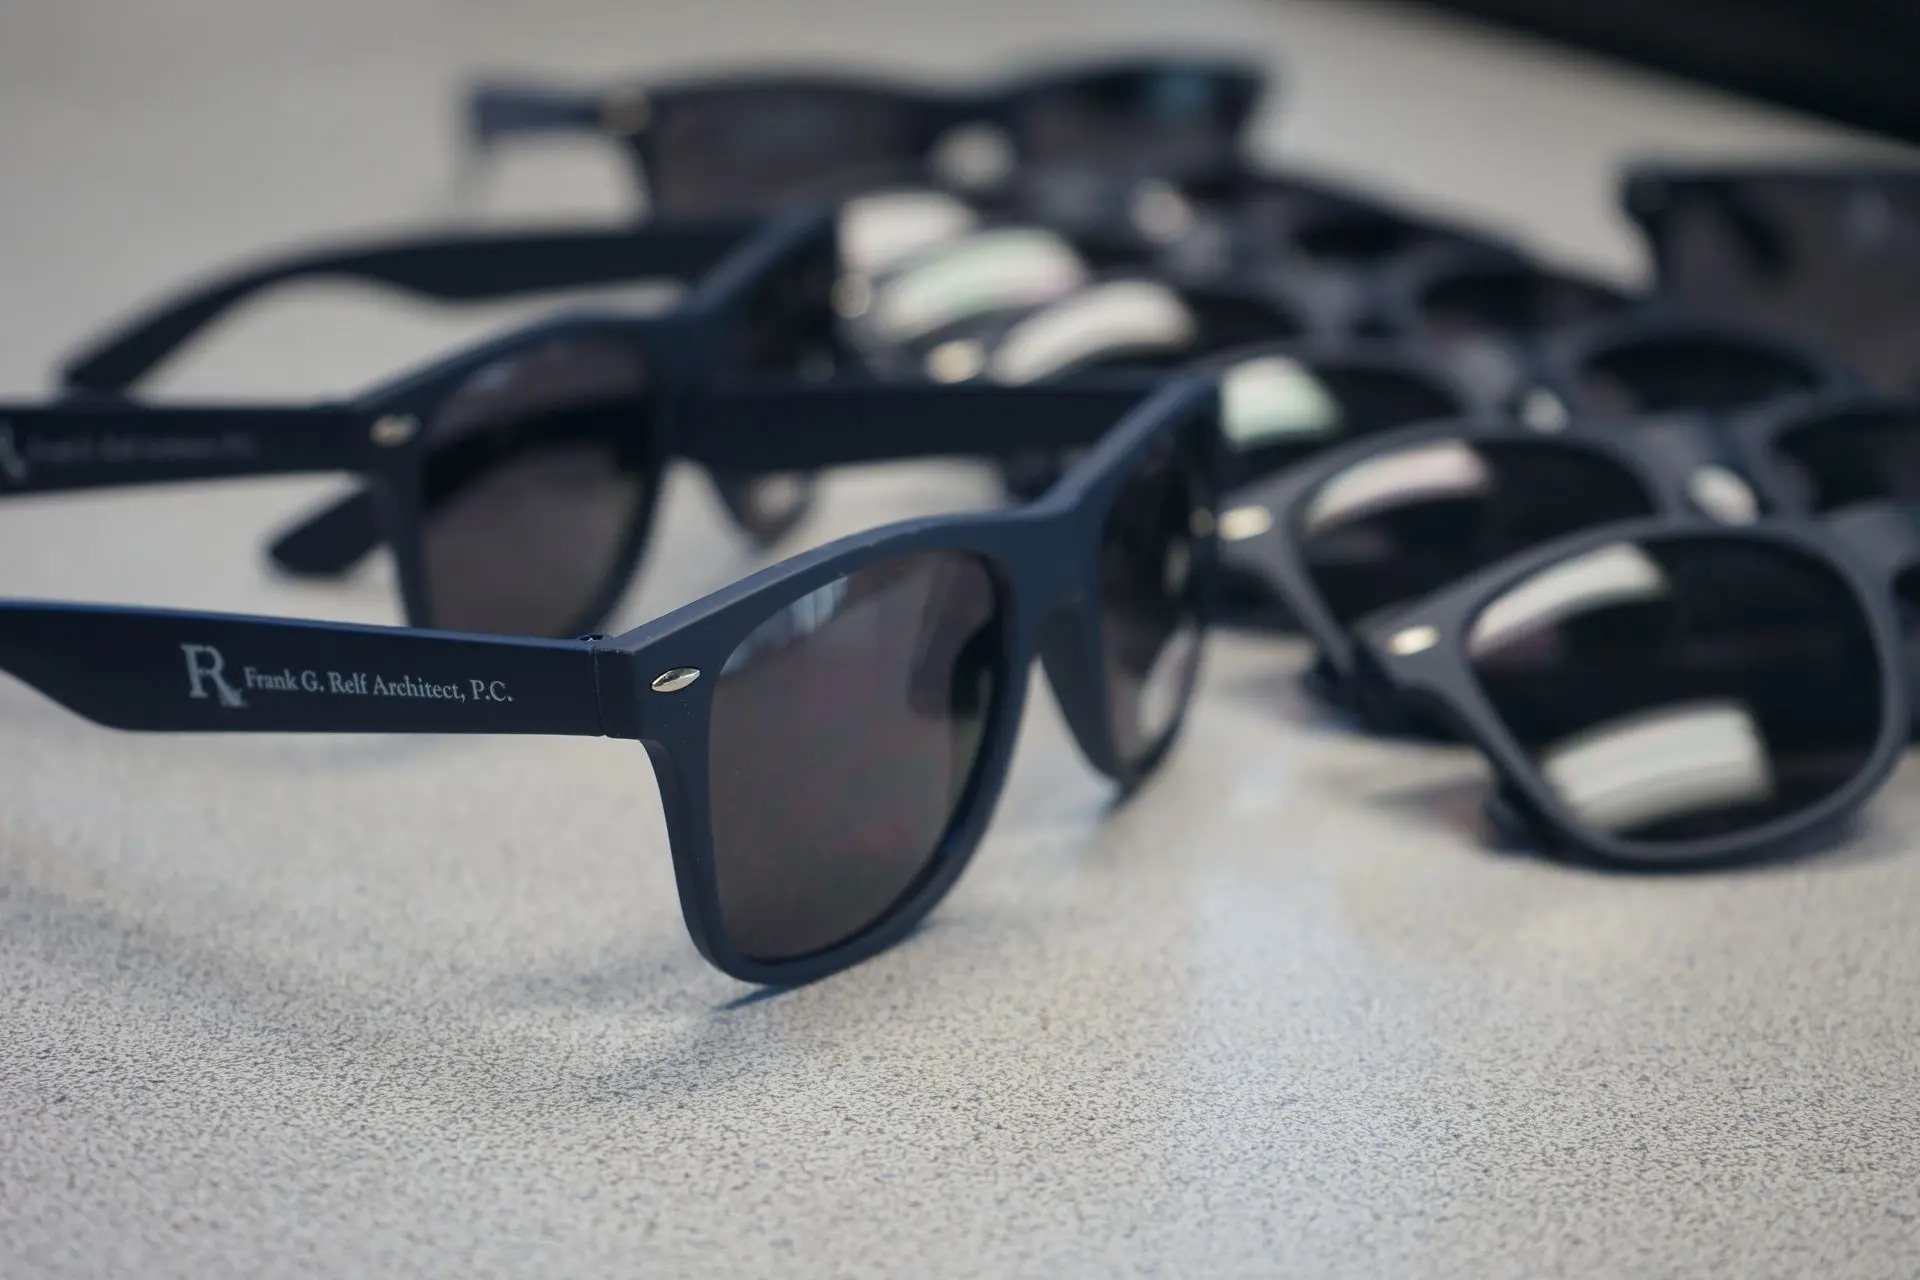 A collection of custom-branded sunglasses with the logo 'R. Frank G. Relf Architect, P.C.' printed on the side. This image showcases personalized promotional items designed to enhance brand visibility and leave a lasting impression.